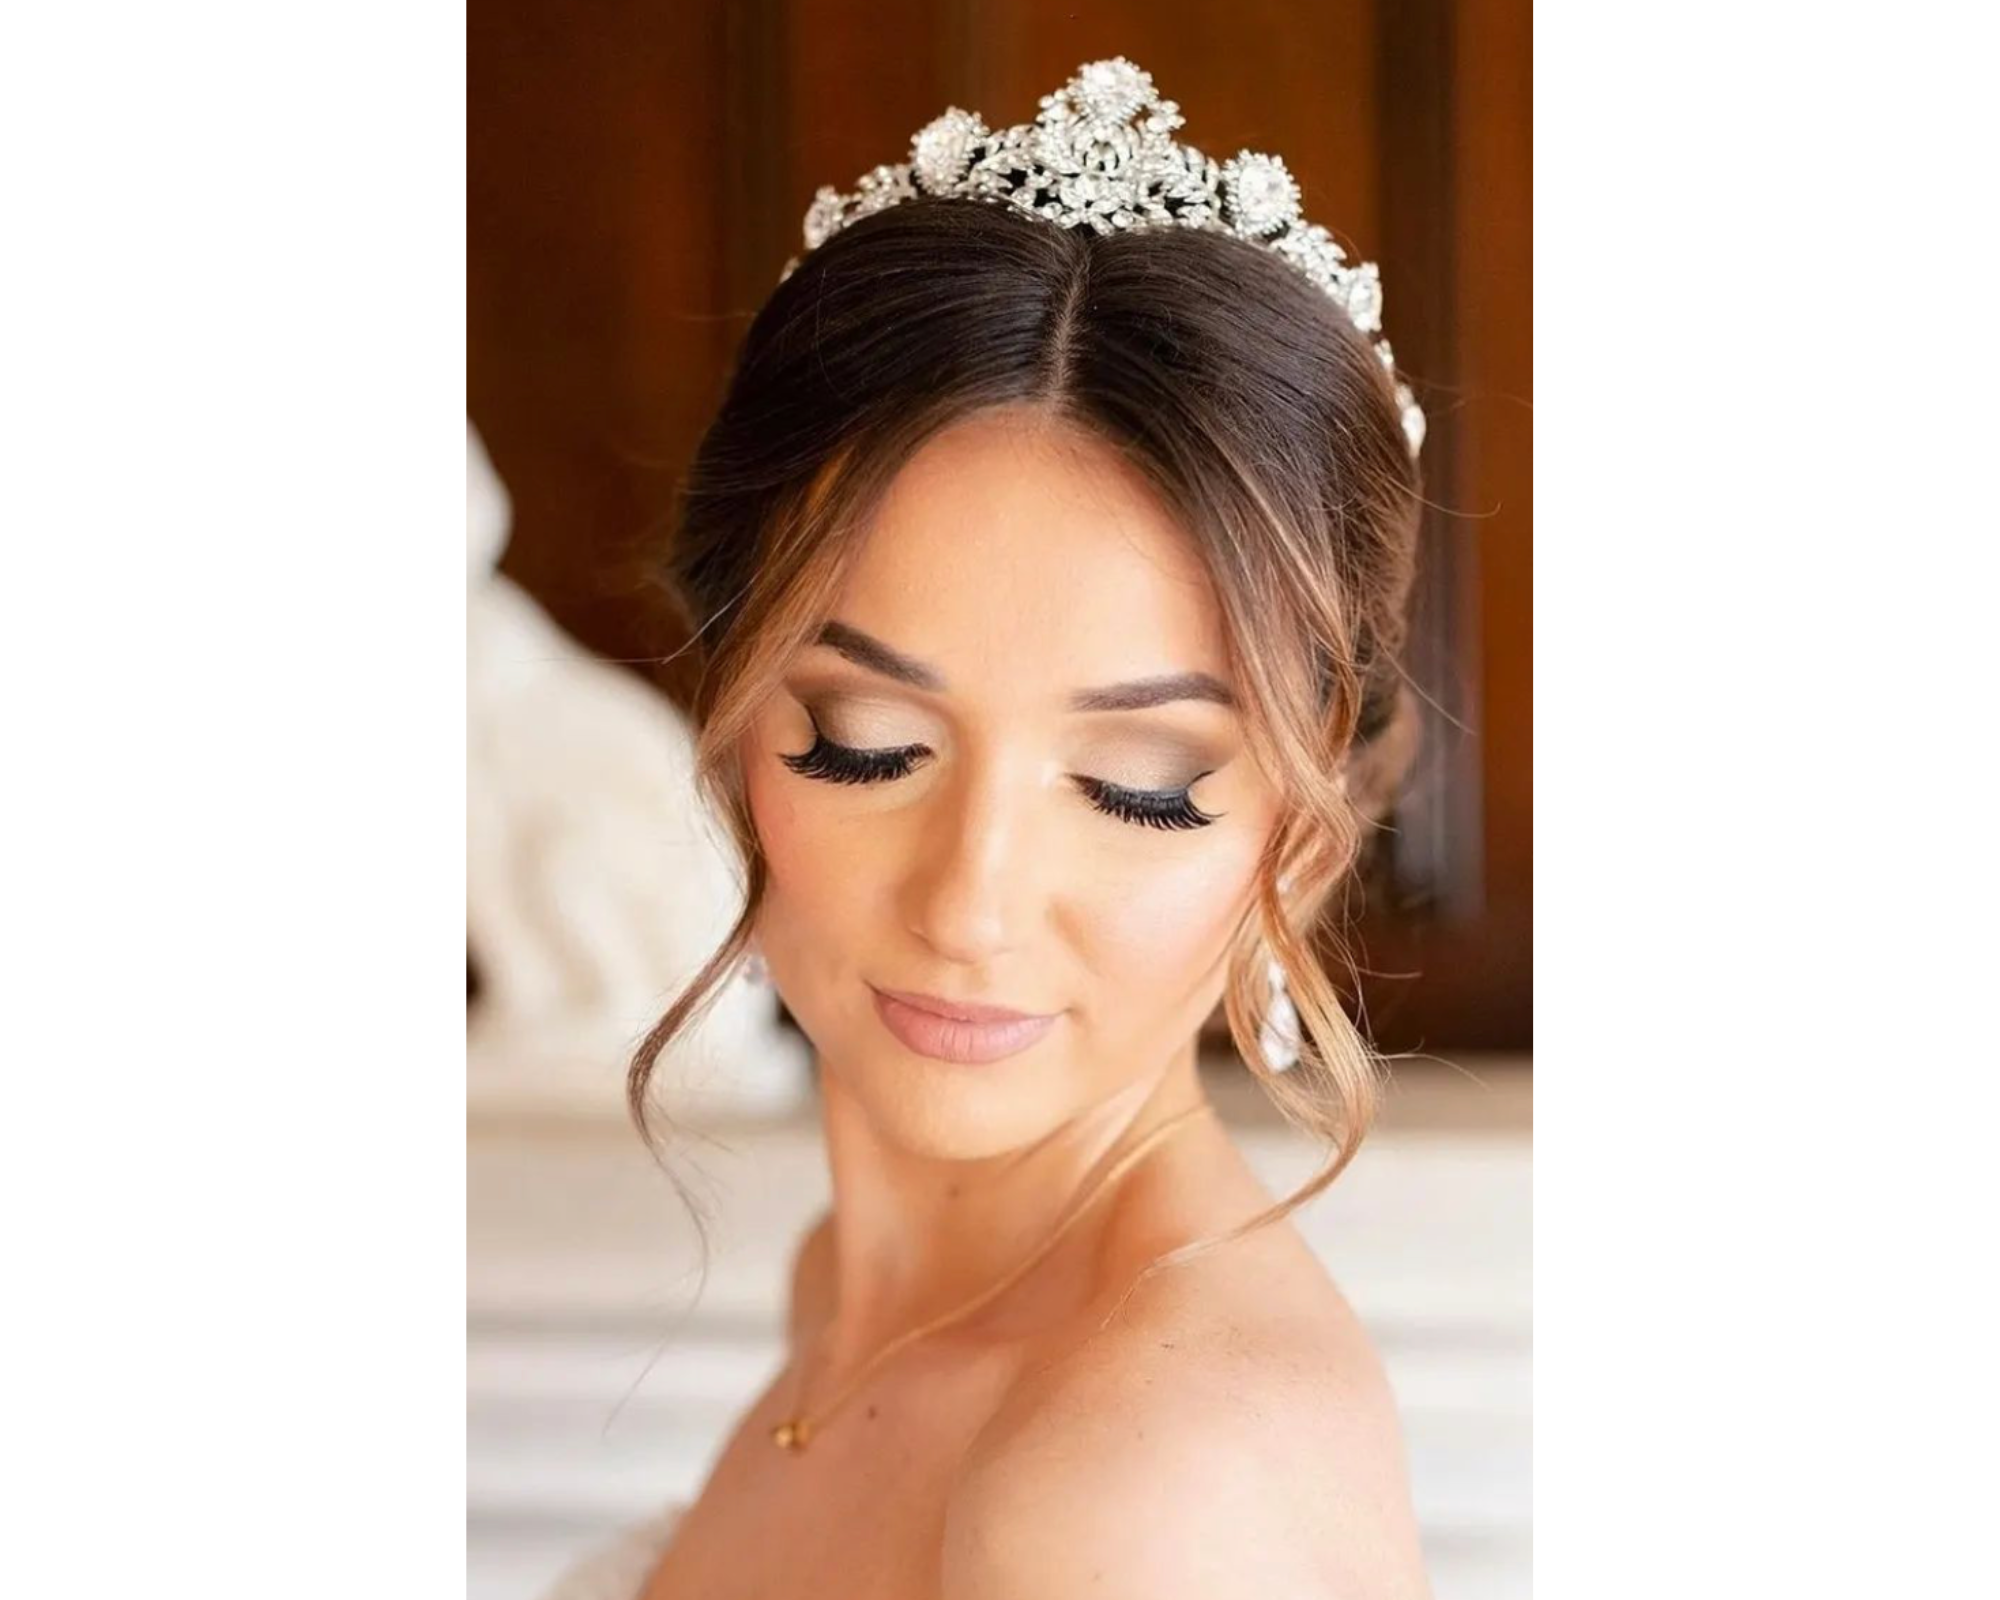 A lovely bride with her hair up wearing a dazzling Swarovski crystal wedding tiara.